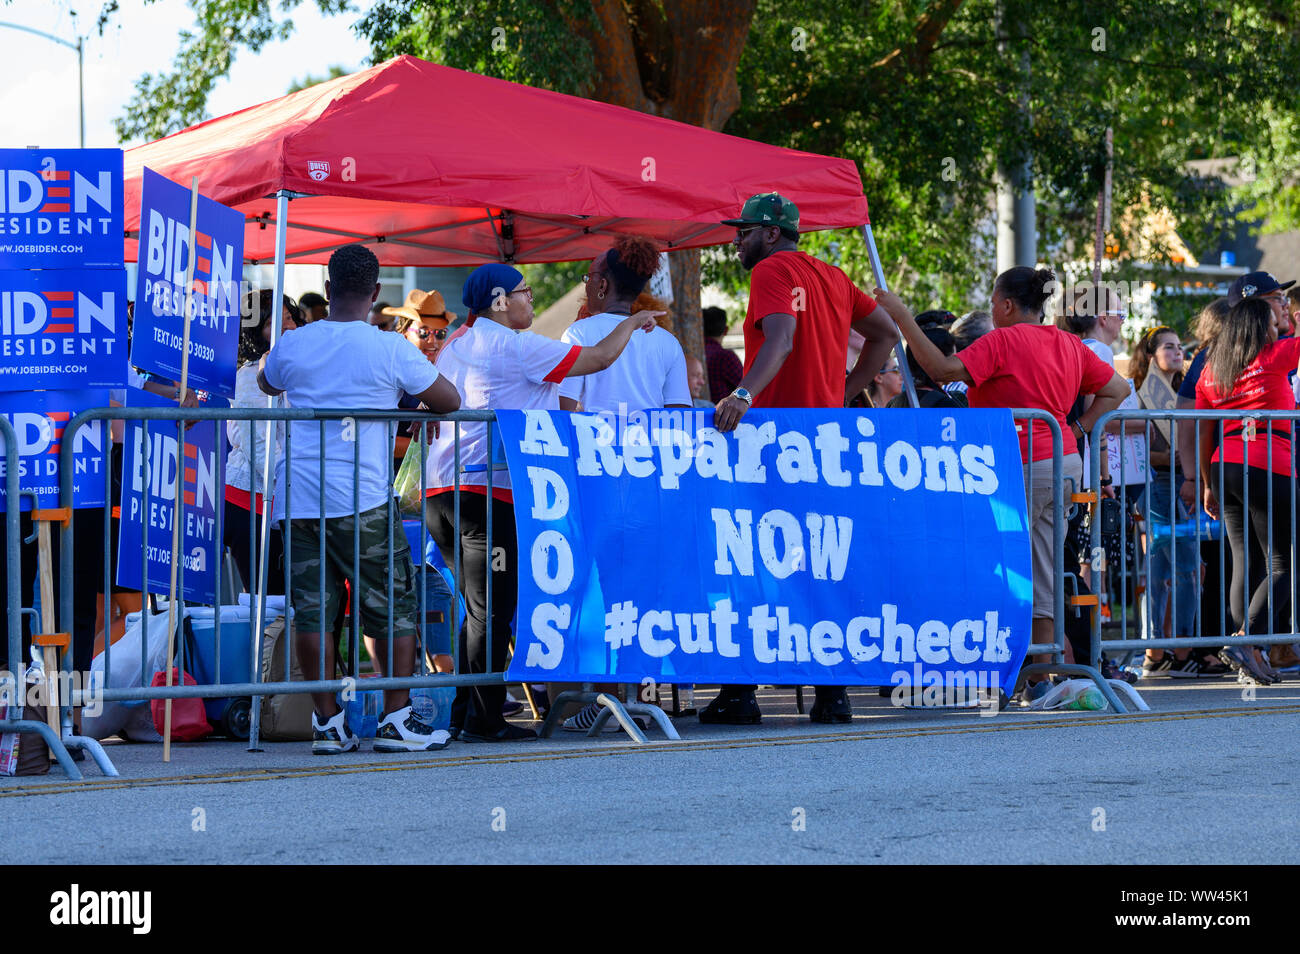 Houston, Texas - September 12, 2019: Small, vocal group of ADOS activists demand reparations for slavery outside Democratic primary debate venue near Stock Photo